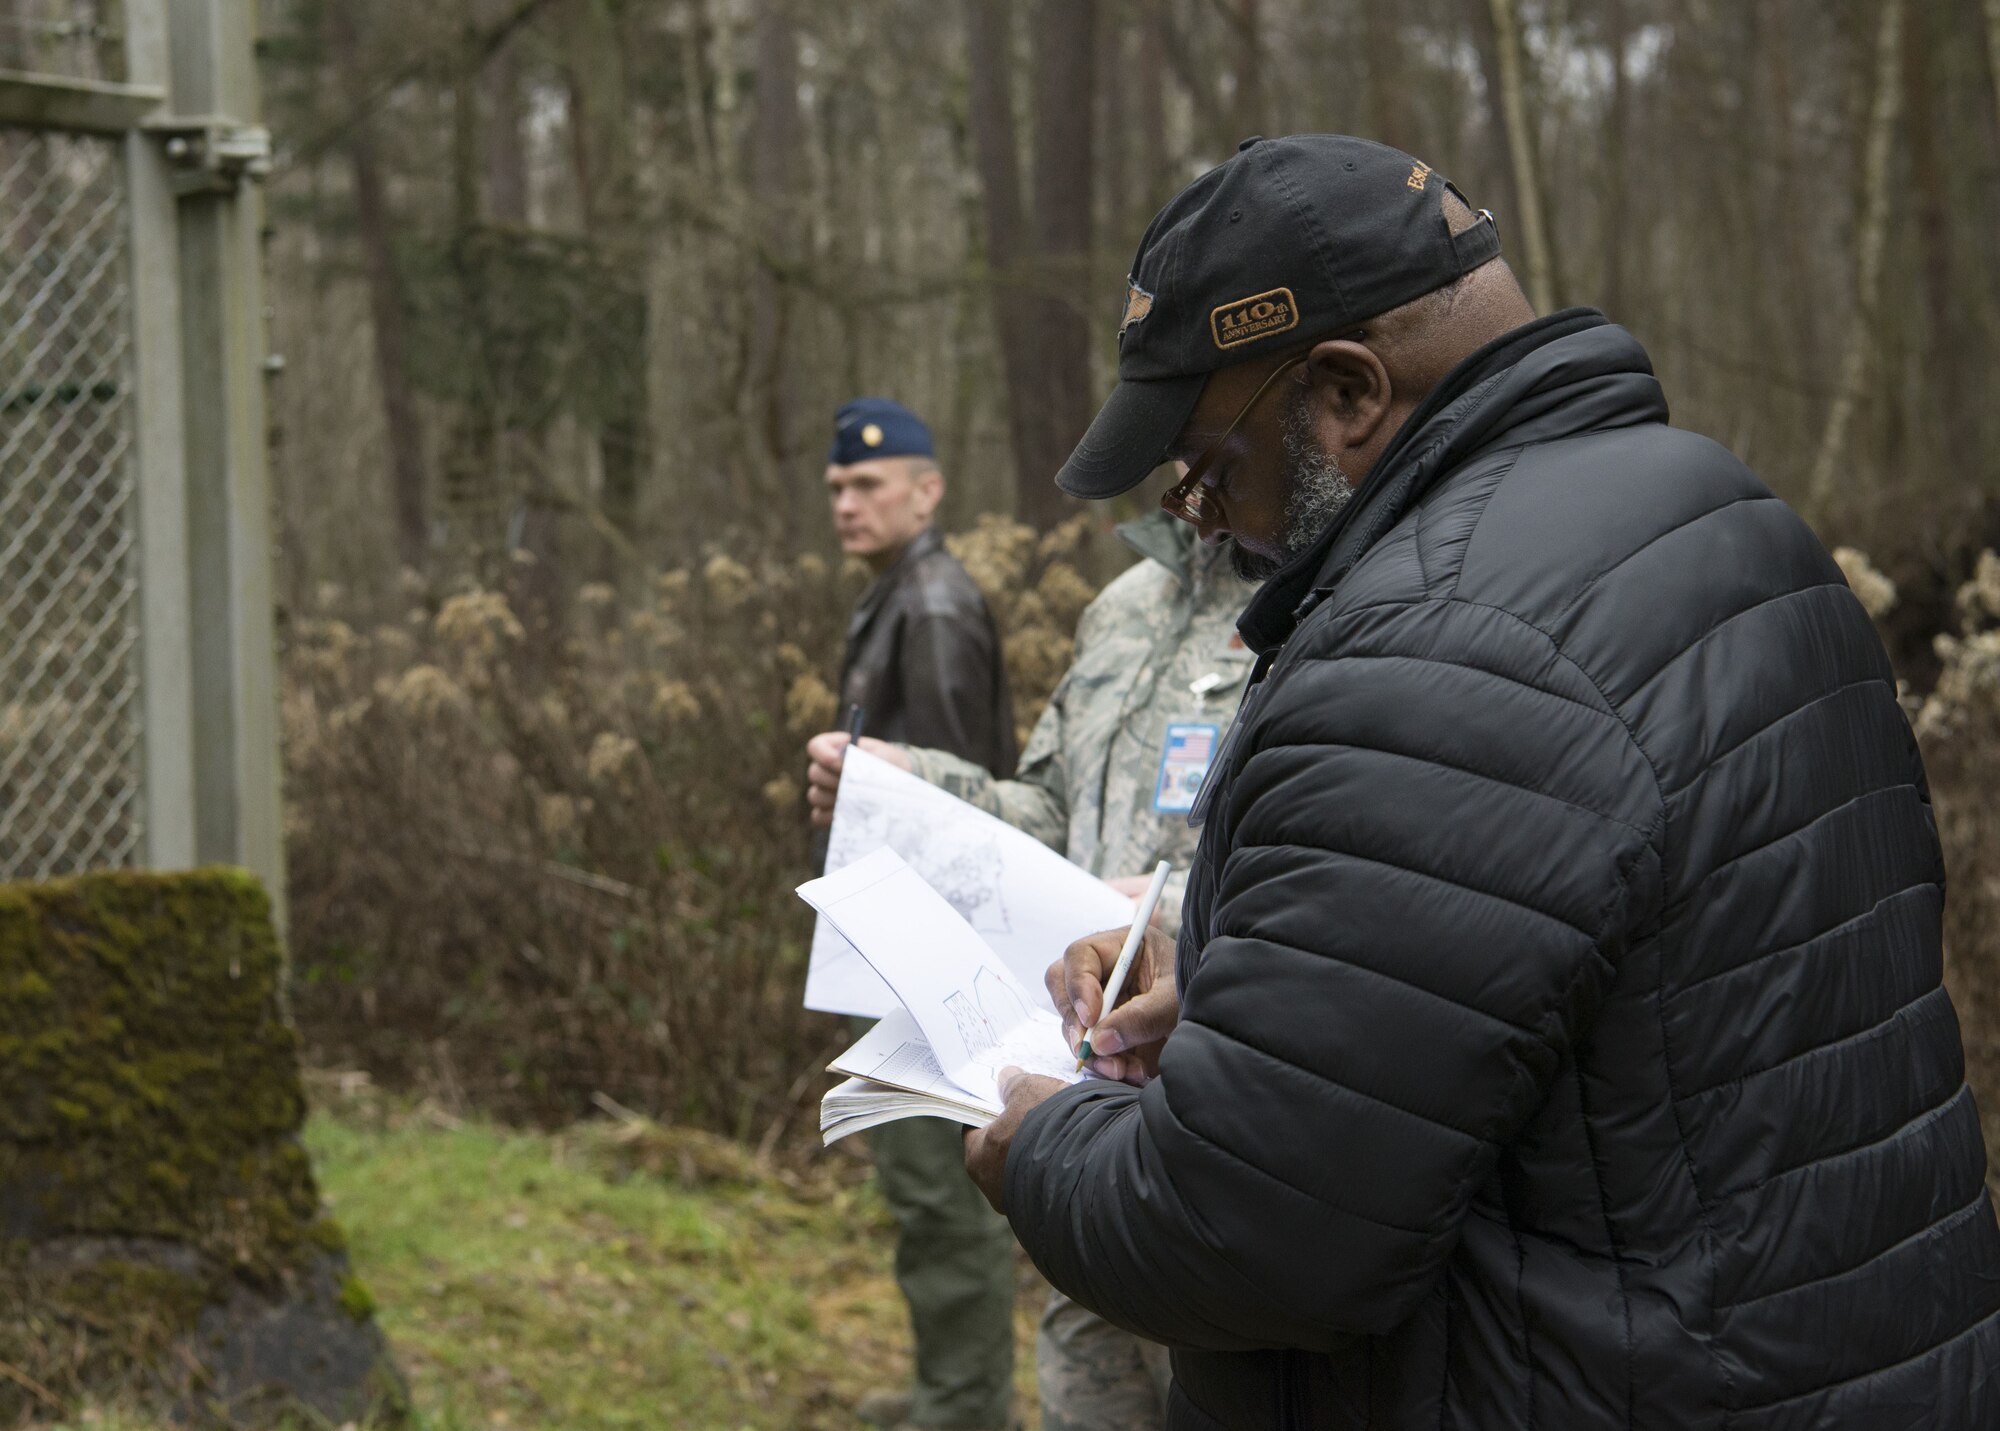 William Hendricks, right, Headquarters United States Air Forces in Europe Arms Control and Counter Proliferation treaty compliance officer, roleplays as an inspector during a Conventional Arms Forces in Europe Inspection Exercise on Ramstein Air Base, Germany, Dec. 6, 2017. Ramstein exercises annually to ensure that it is in compliance with the treaty, which establishes that at any moment, any of the 30 countries can announce that they are giving 36 hours’ notice before inspecting Ramstein Air for combat capabilities such as combat aircraft. (U.S. Air Force photo by Senior Airman Elizabeth Baker)